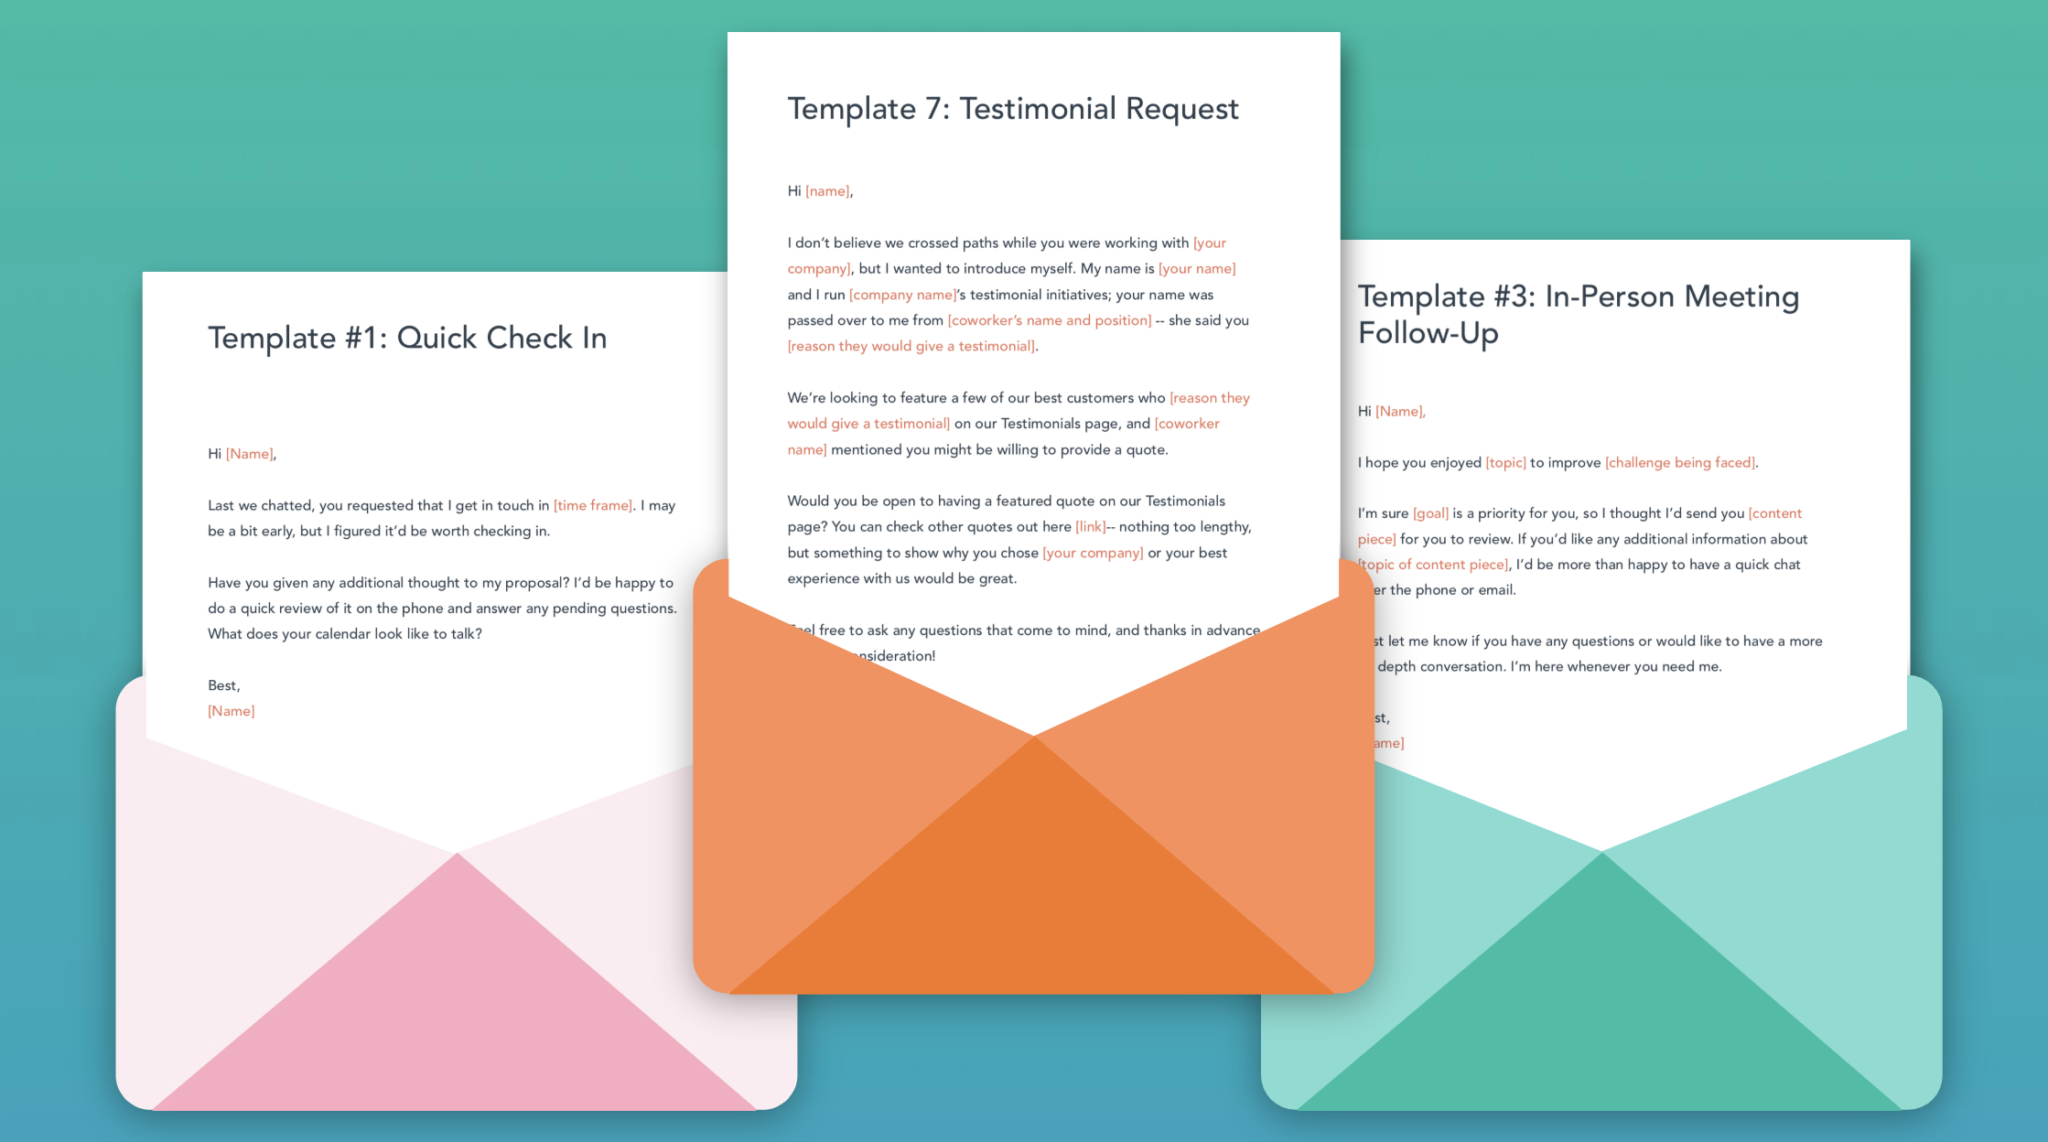 hubspot-free-email-marketing-templates-with-hubspot-email-templates